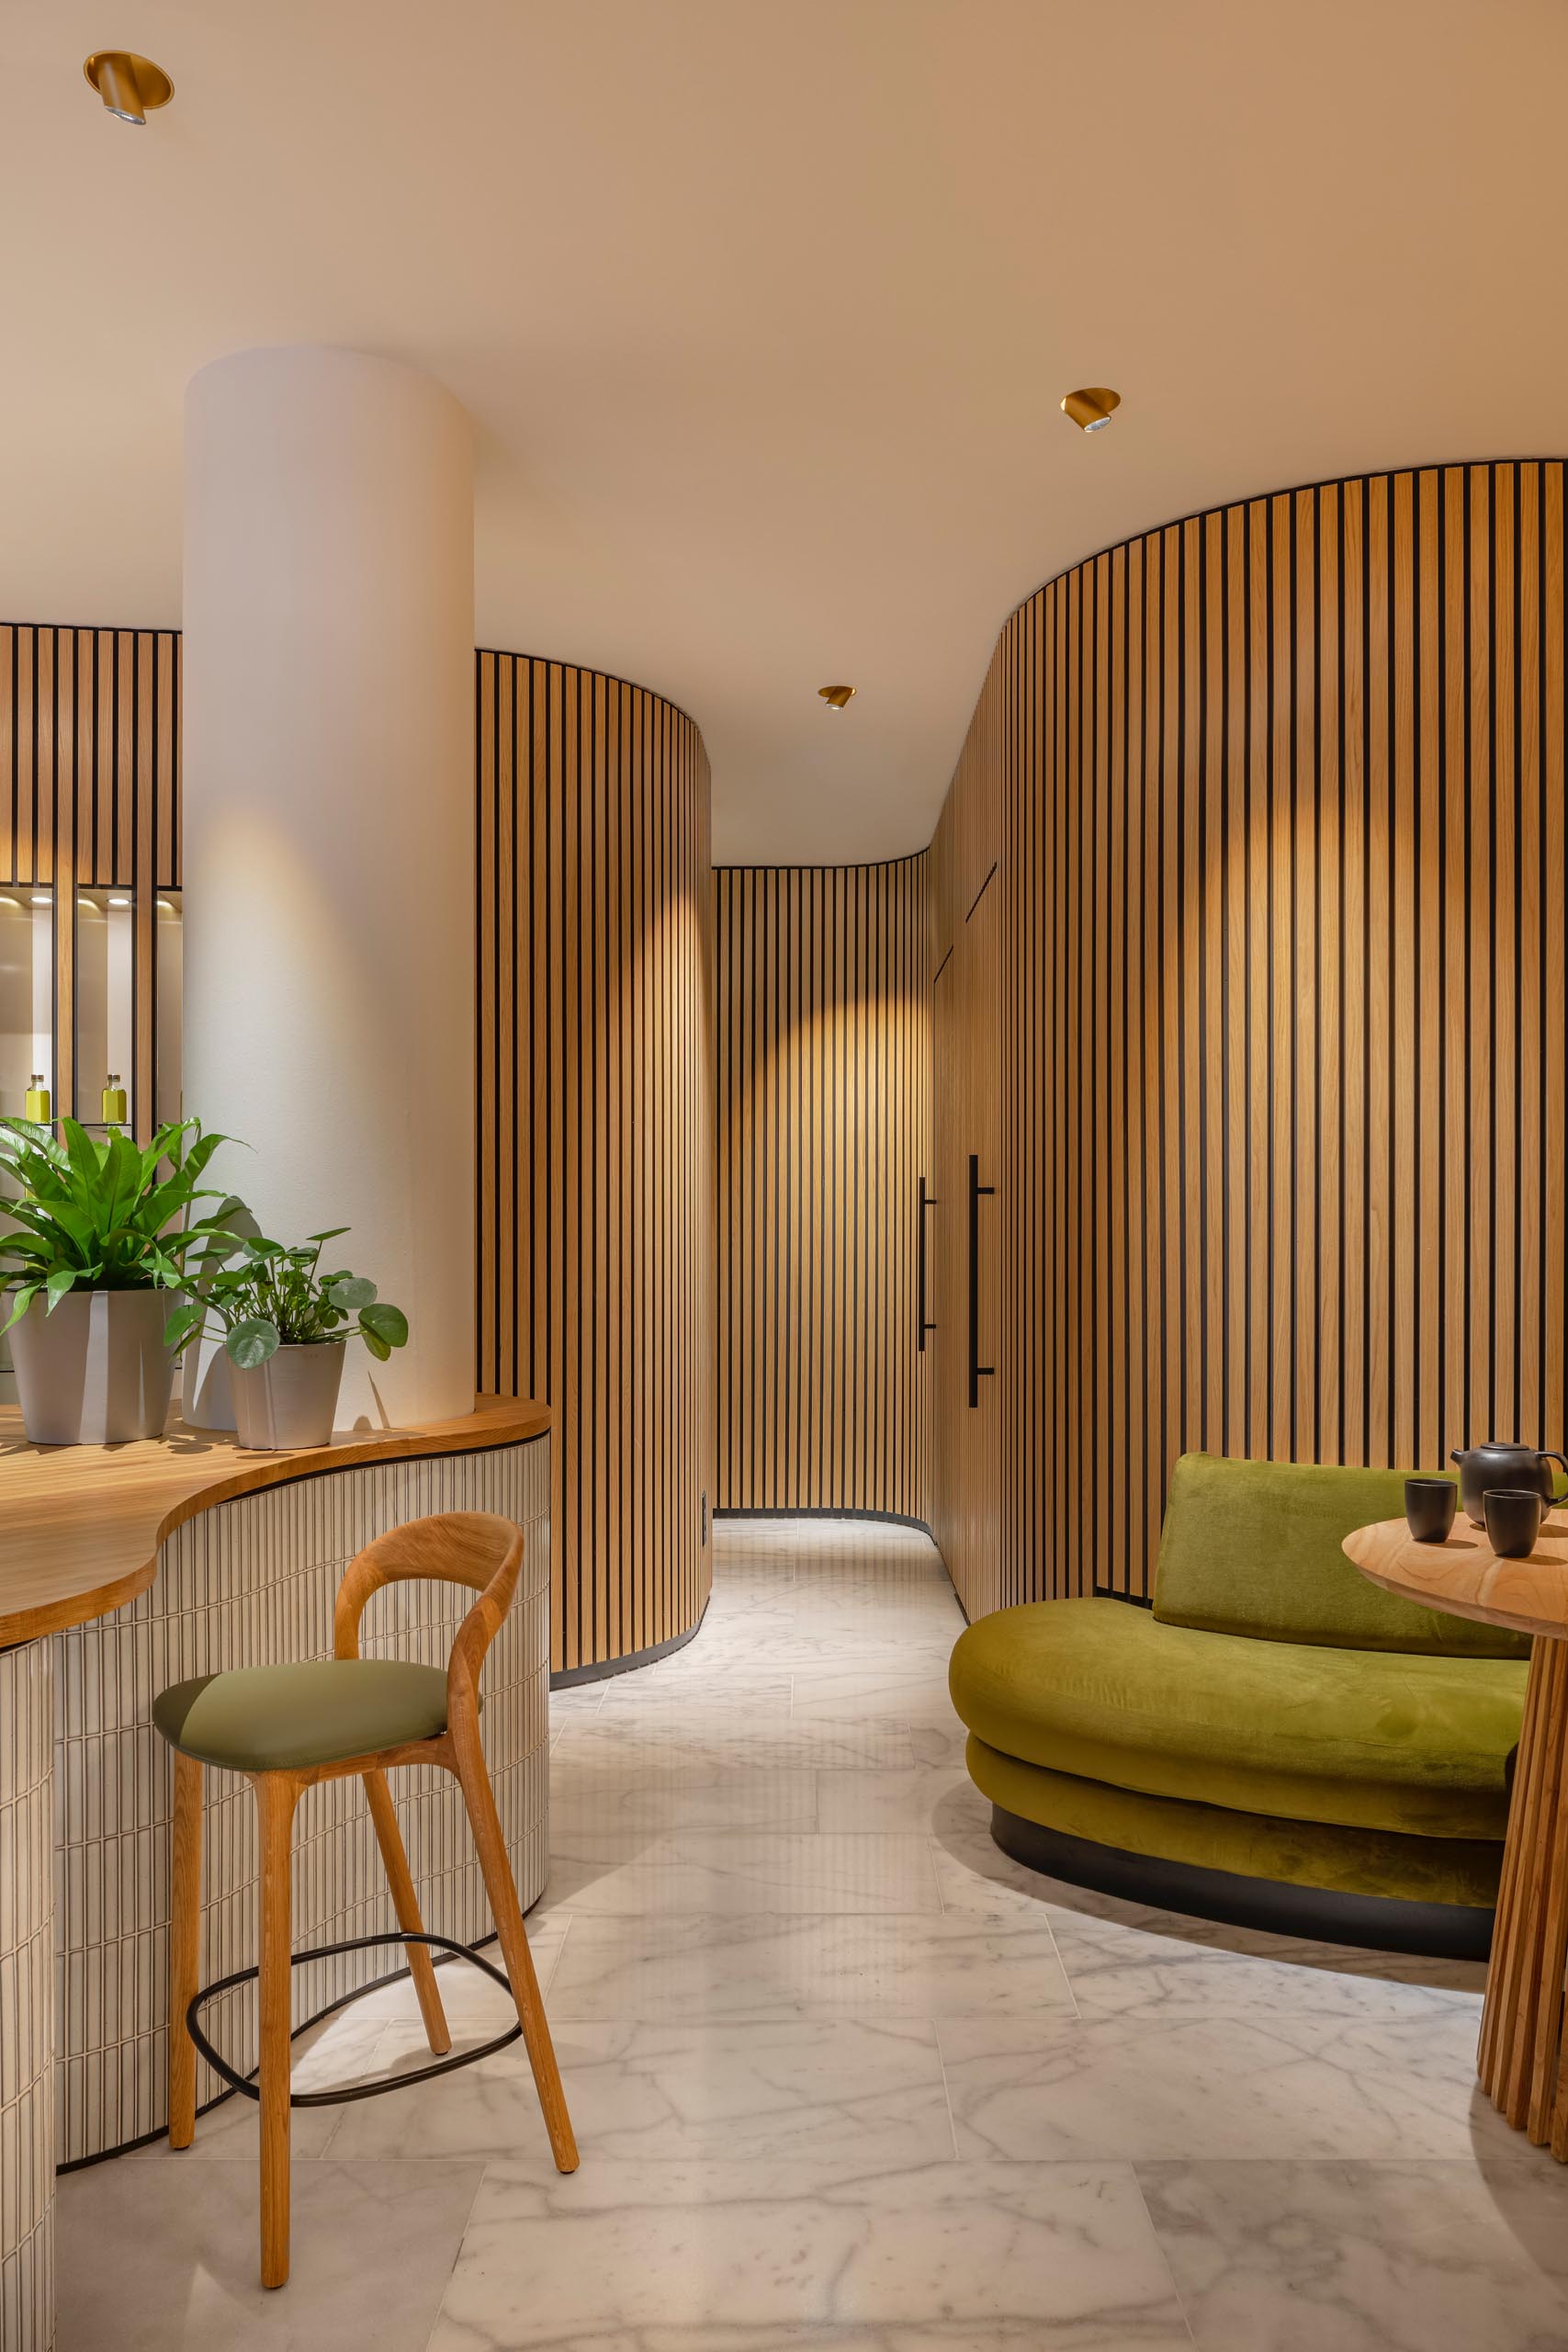 Blending into the organically shaped walls are the doors to the massage rooms, only noticeable by the black hardware.